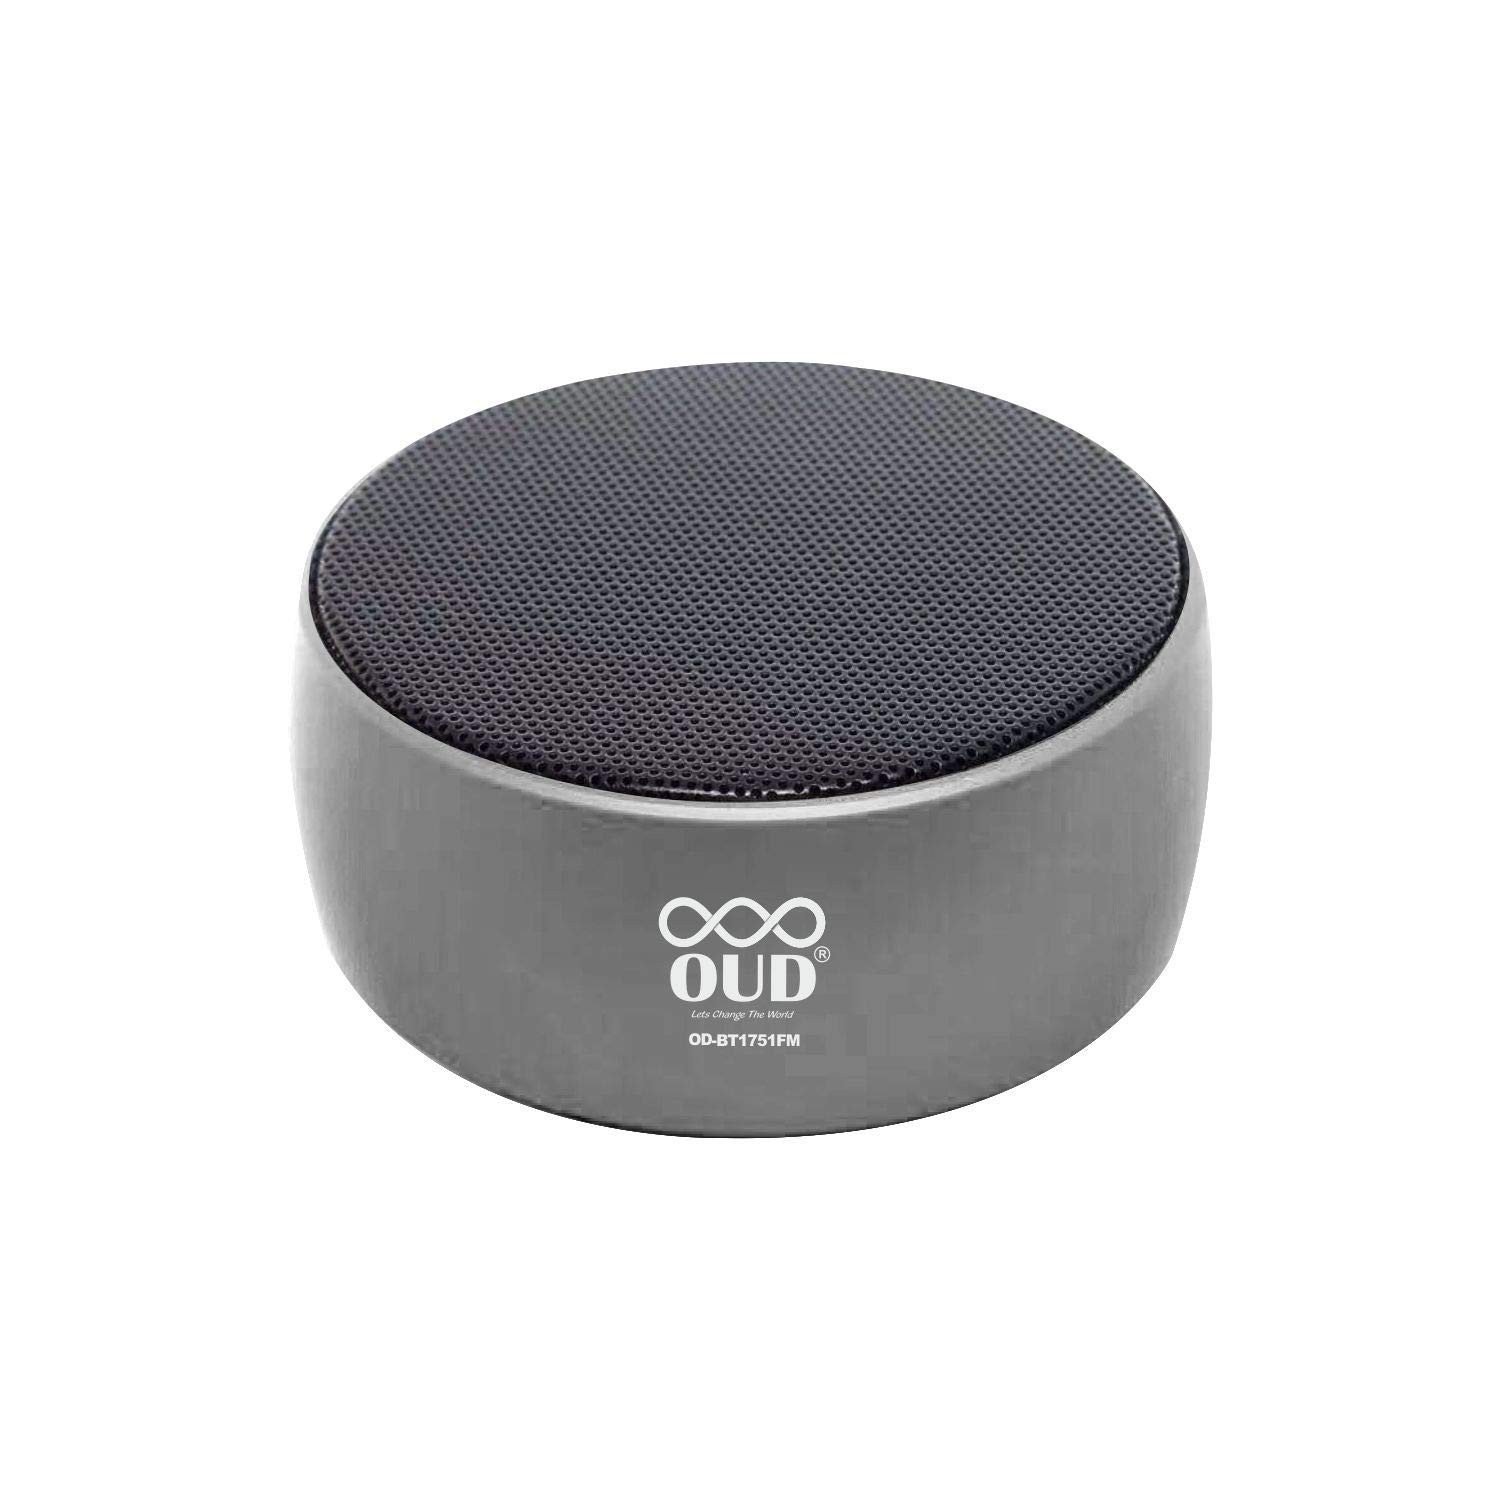 OUD OD-BT1751FM Portable Wireless Speakers with Metallic Body/Dual Speaker/FM Radio/TWS/USB Disk/SD Card/AUX Input,Enriched with Calling Feature (Grey)